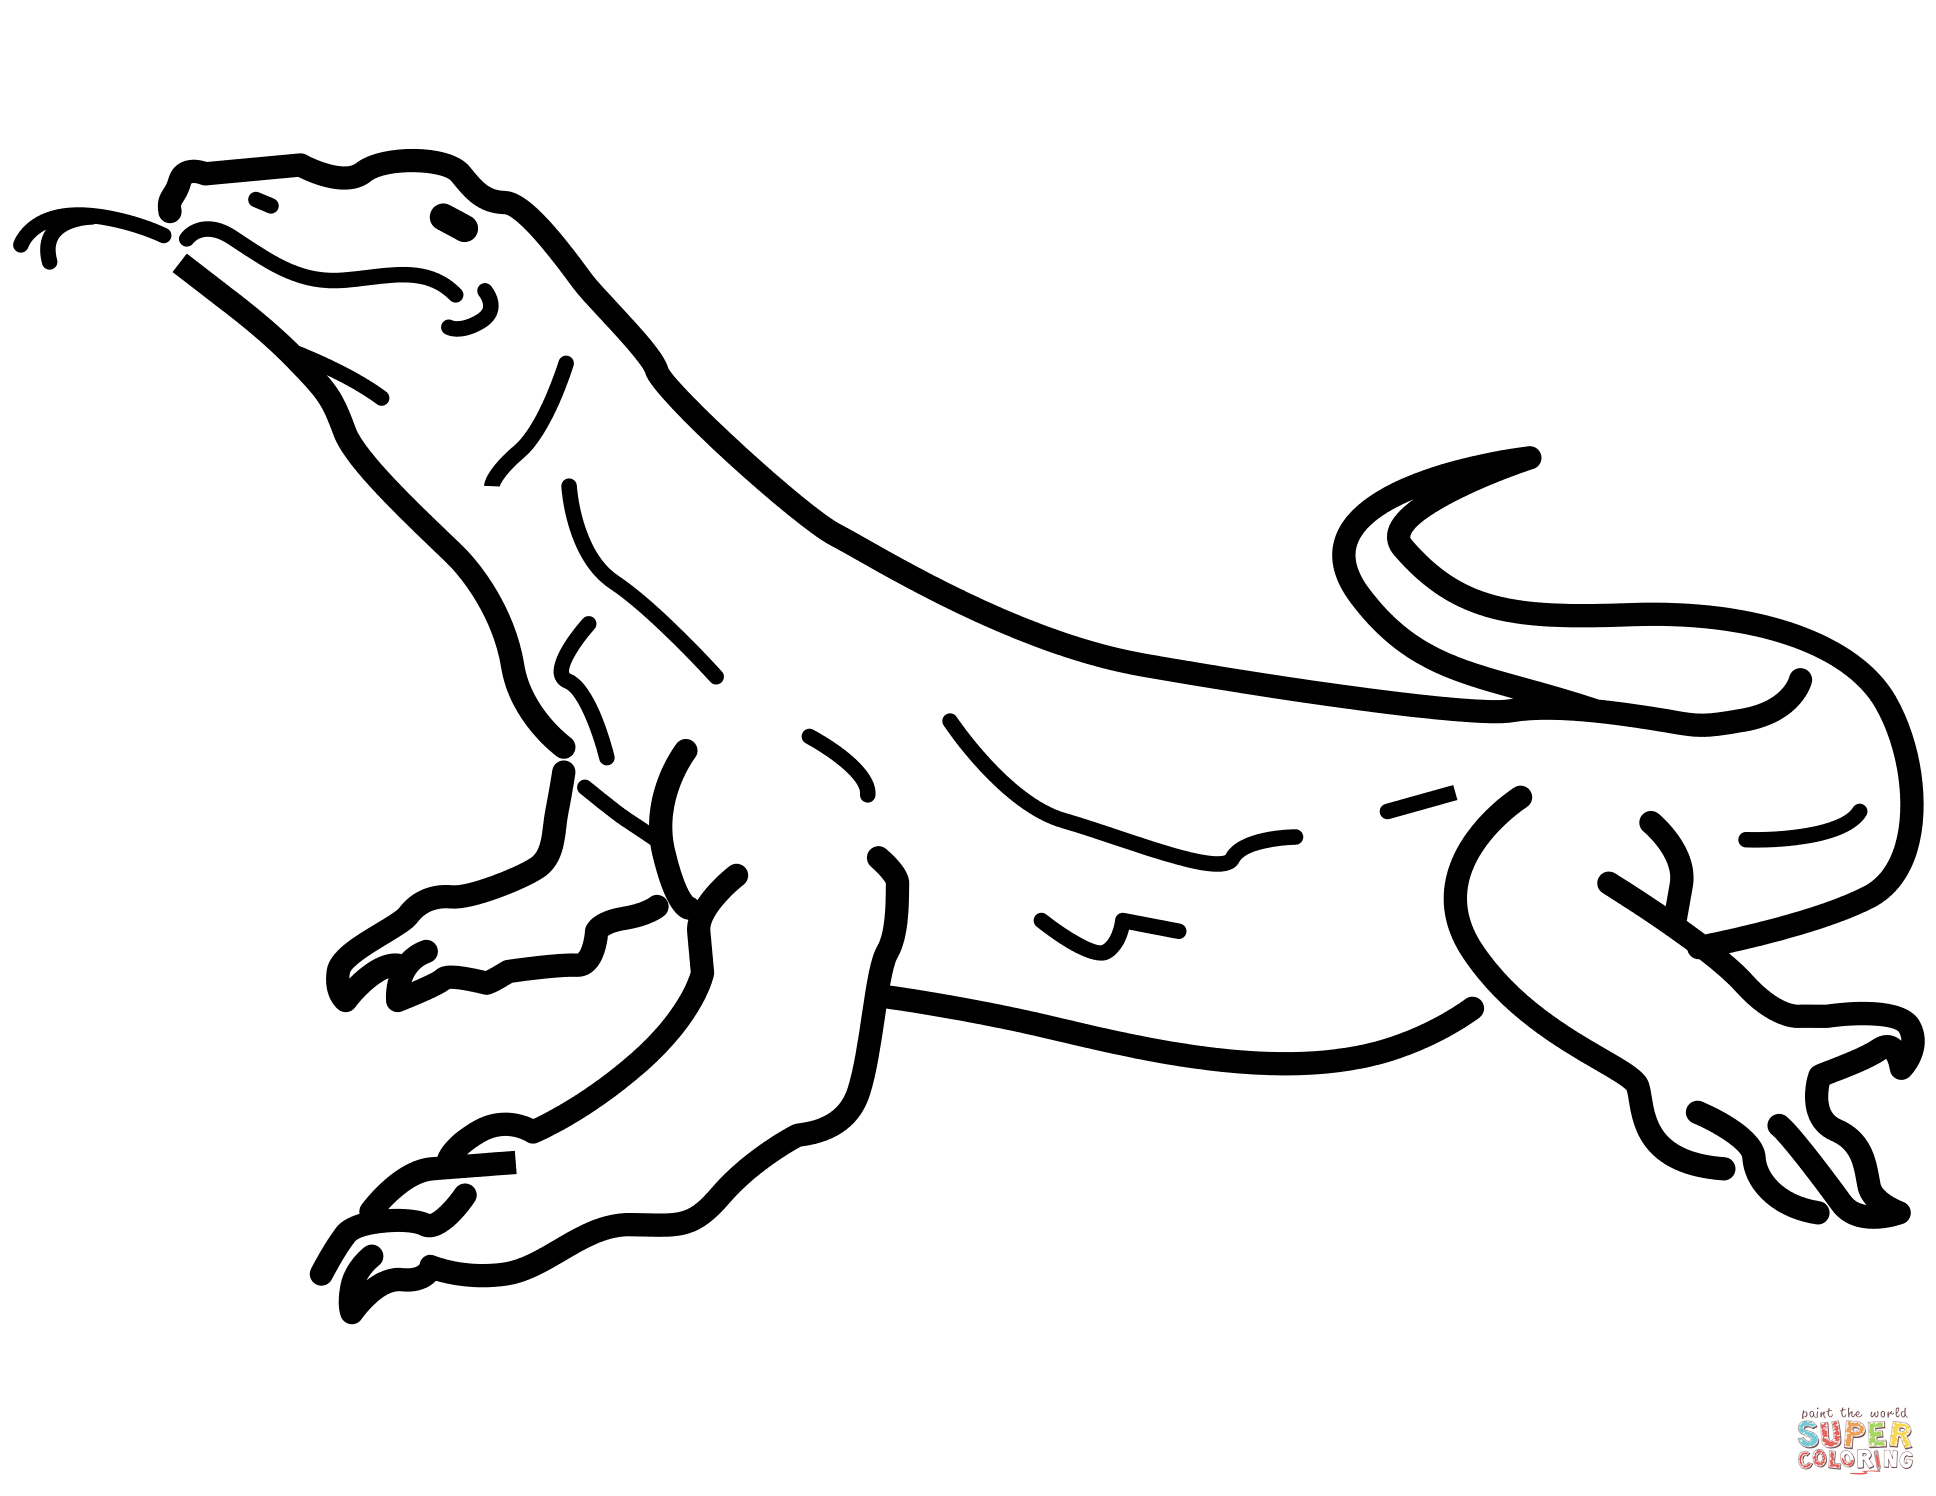 coloring page lizard lizard coloring pages to download and print for free coloring page lizard 